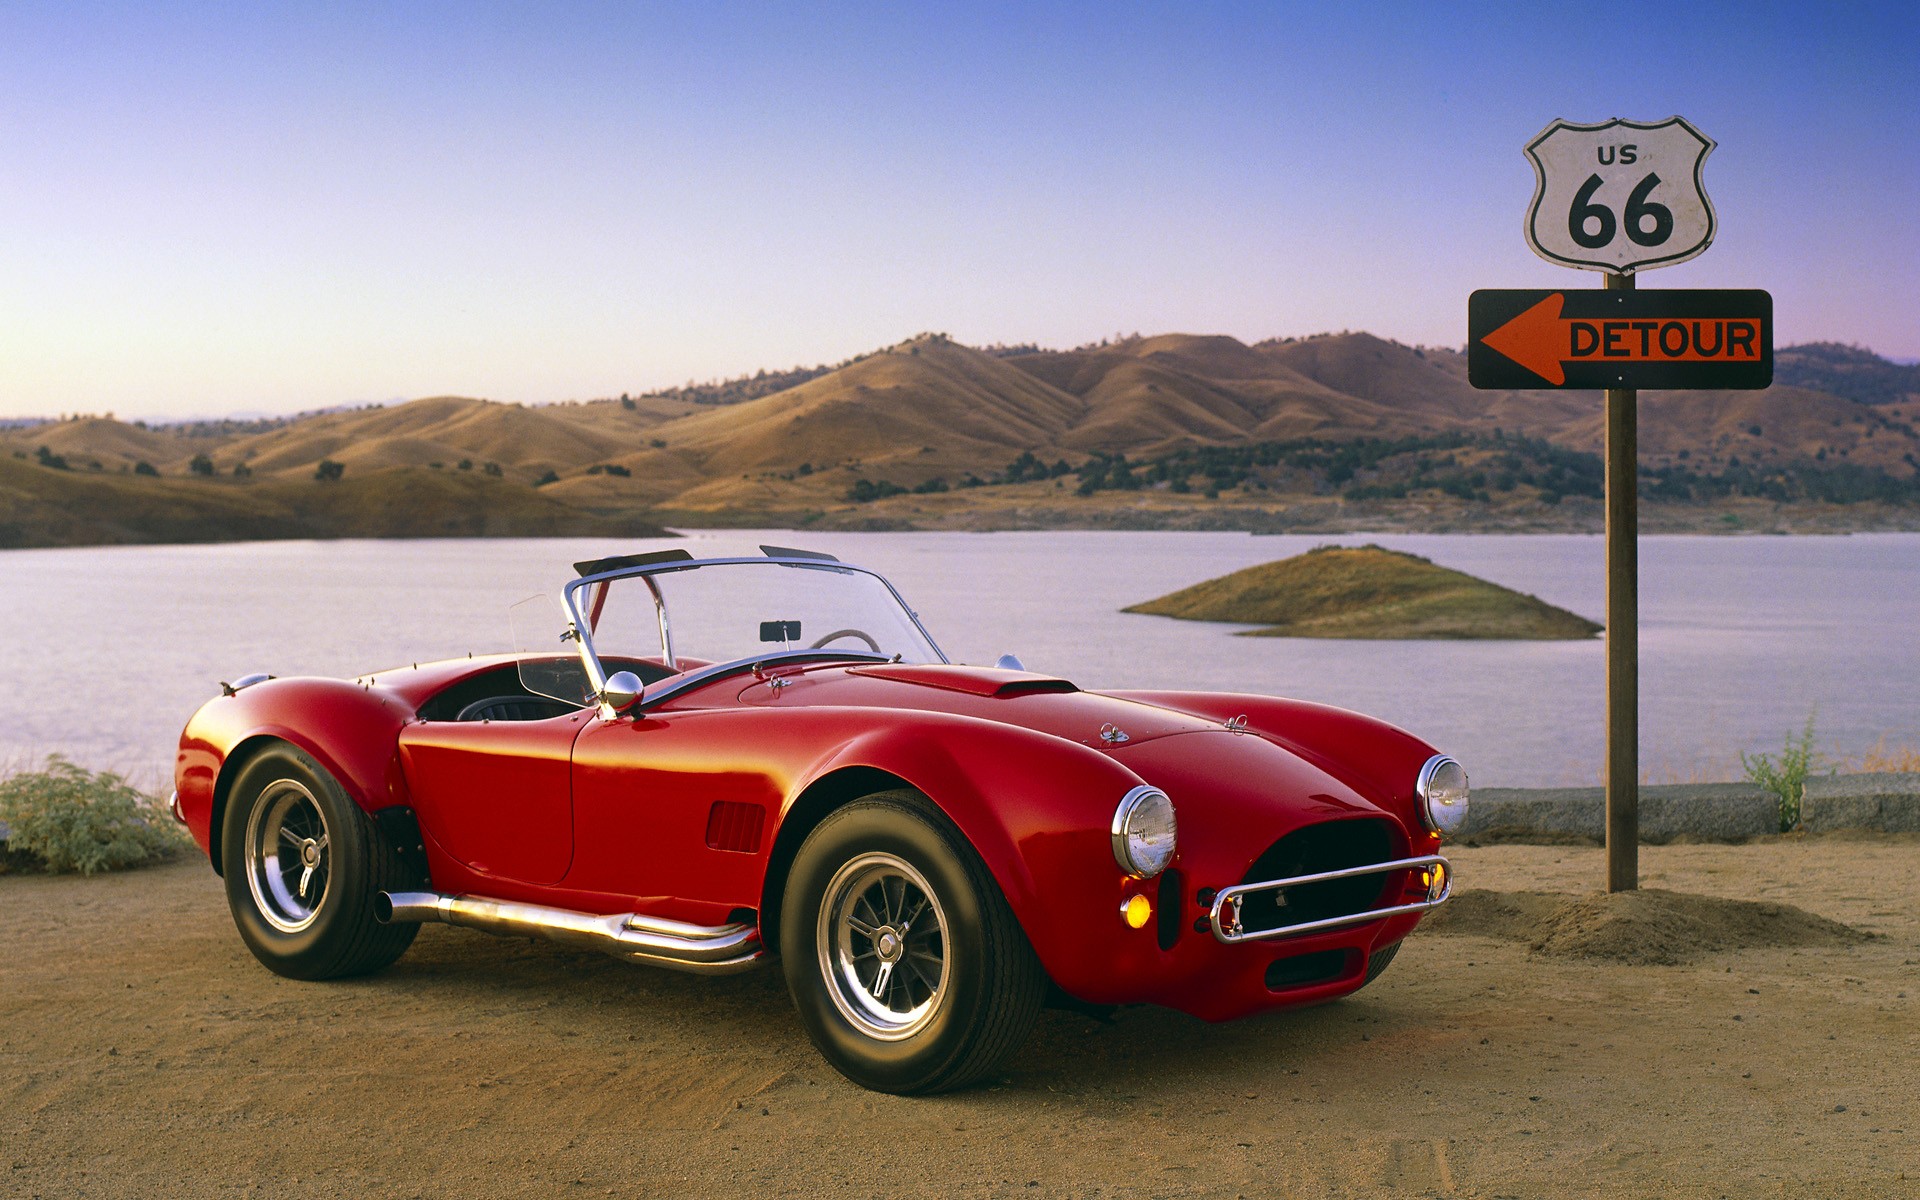 USA, Road, Route 66, Old Car, Shelby, Shelby Cobra 427 Wallpaper